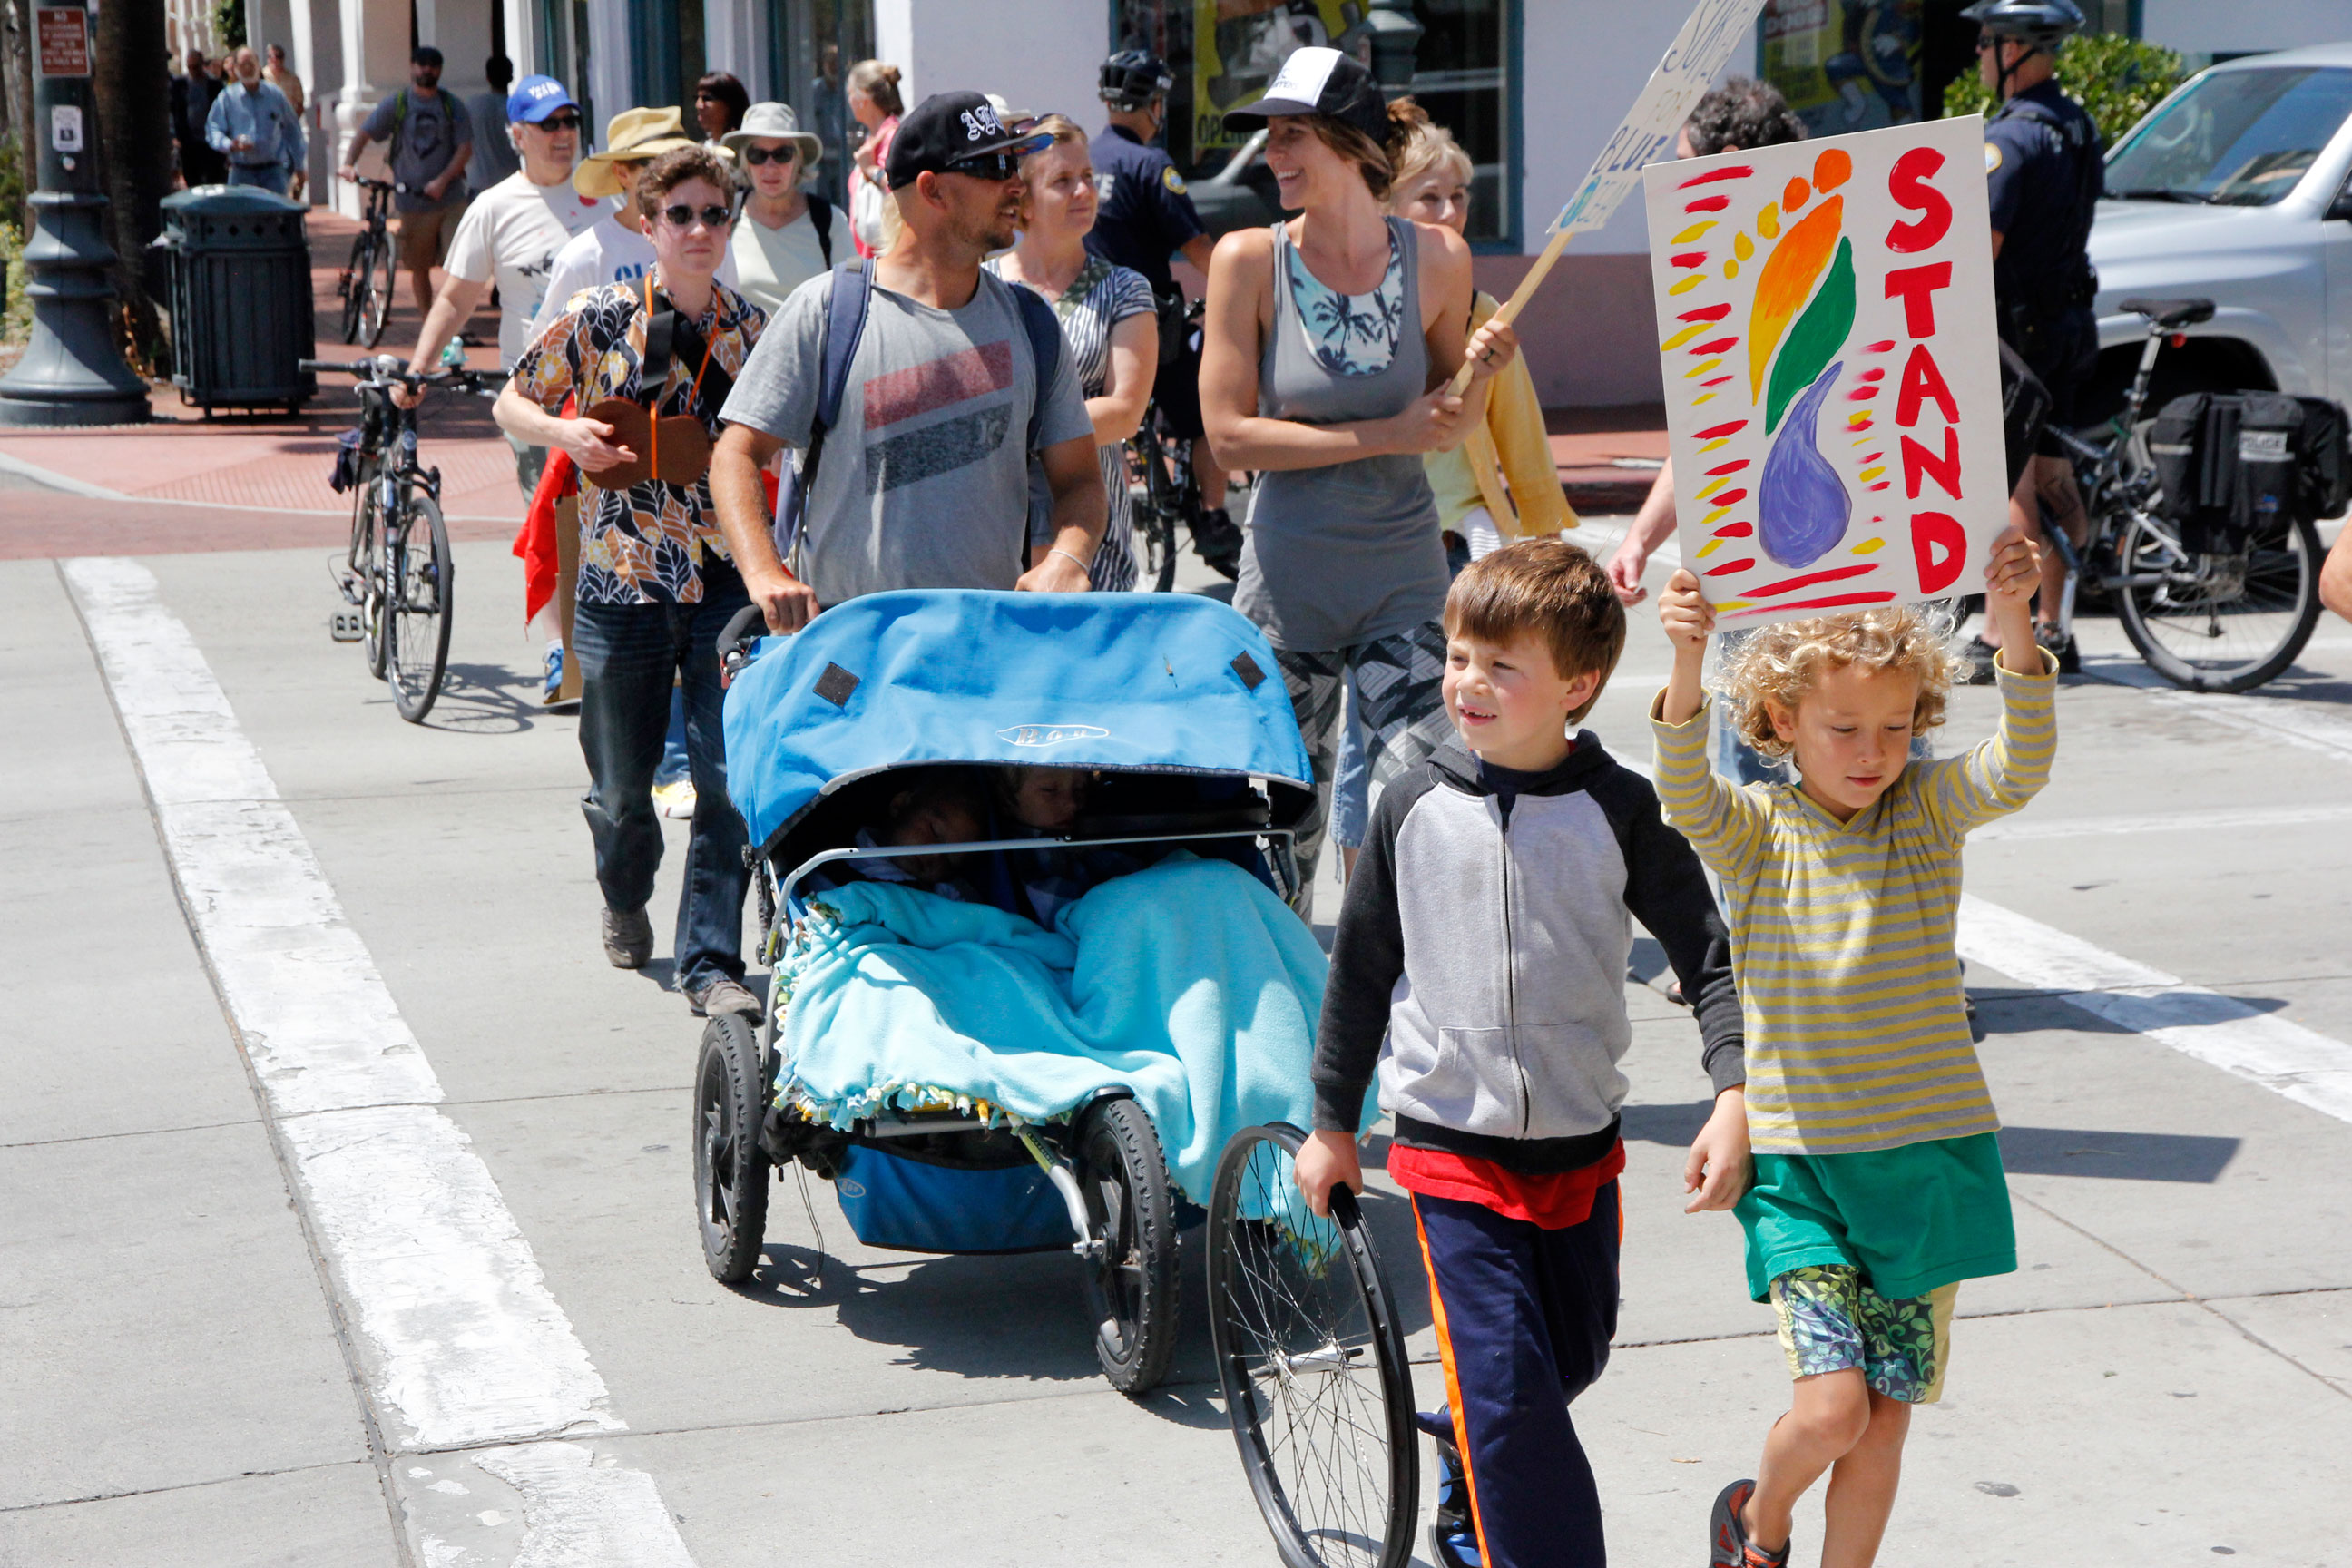 Ralliers march down the streets of Santa Barbara in response to the Refugio State Beach oil spill. 